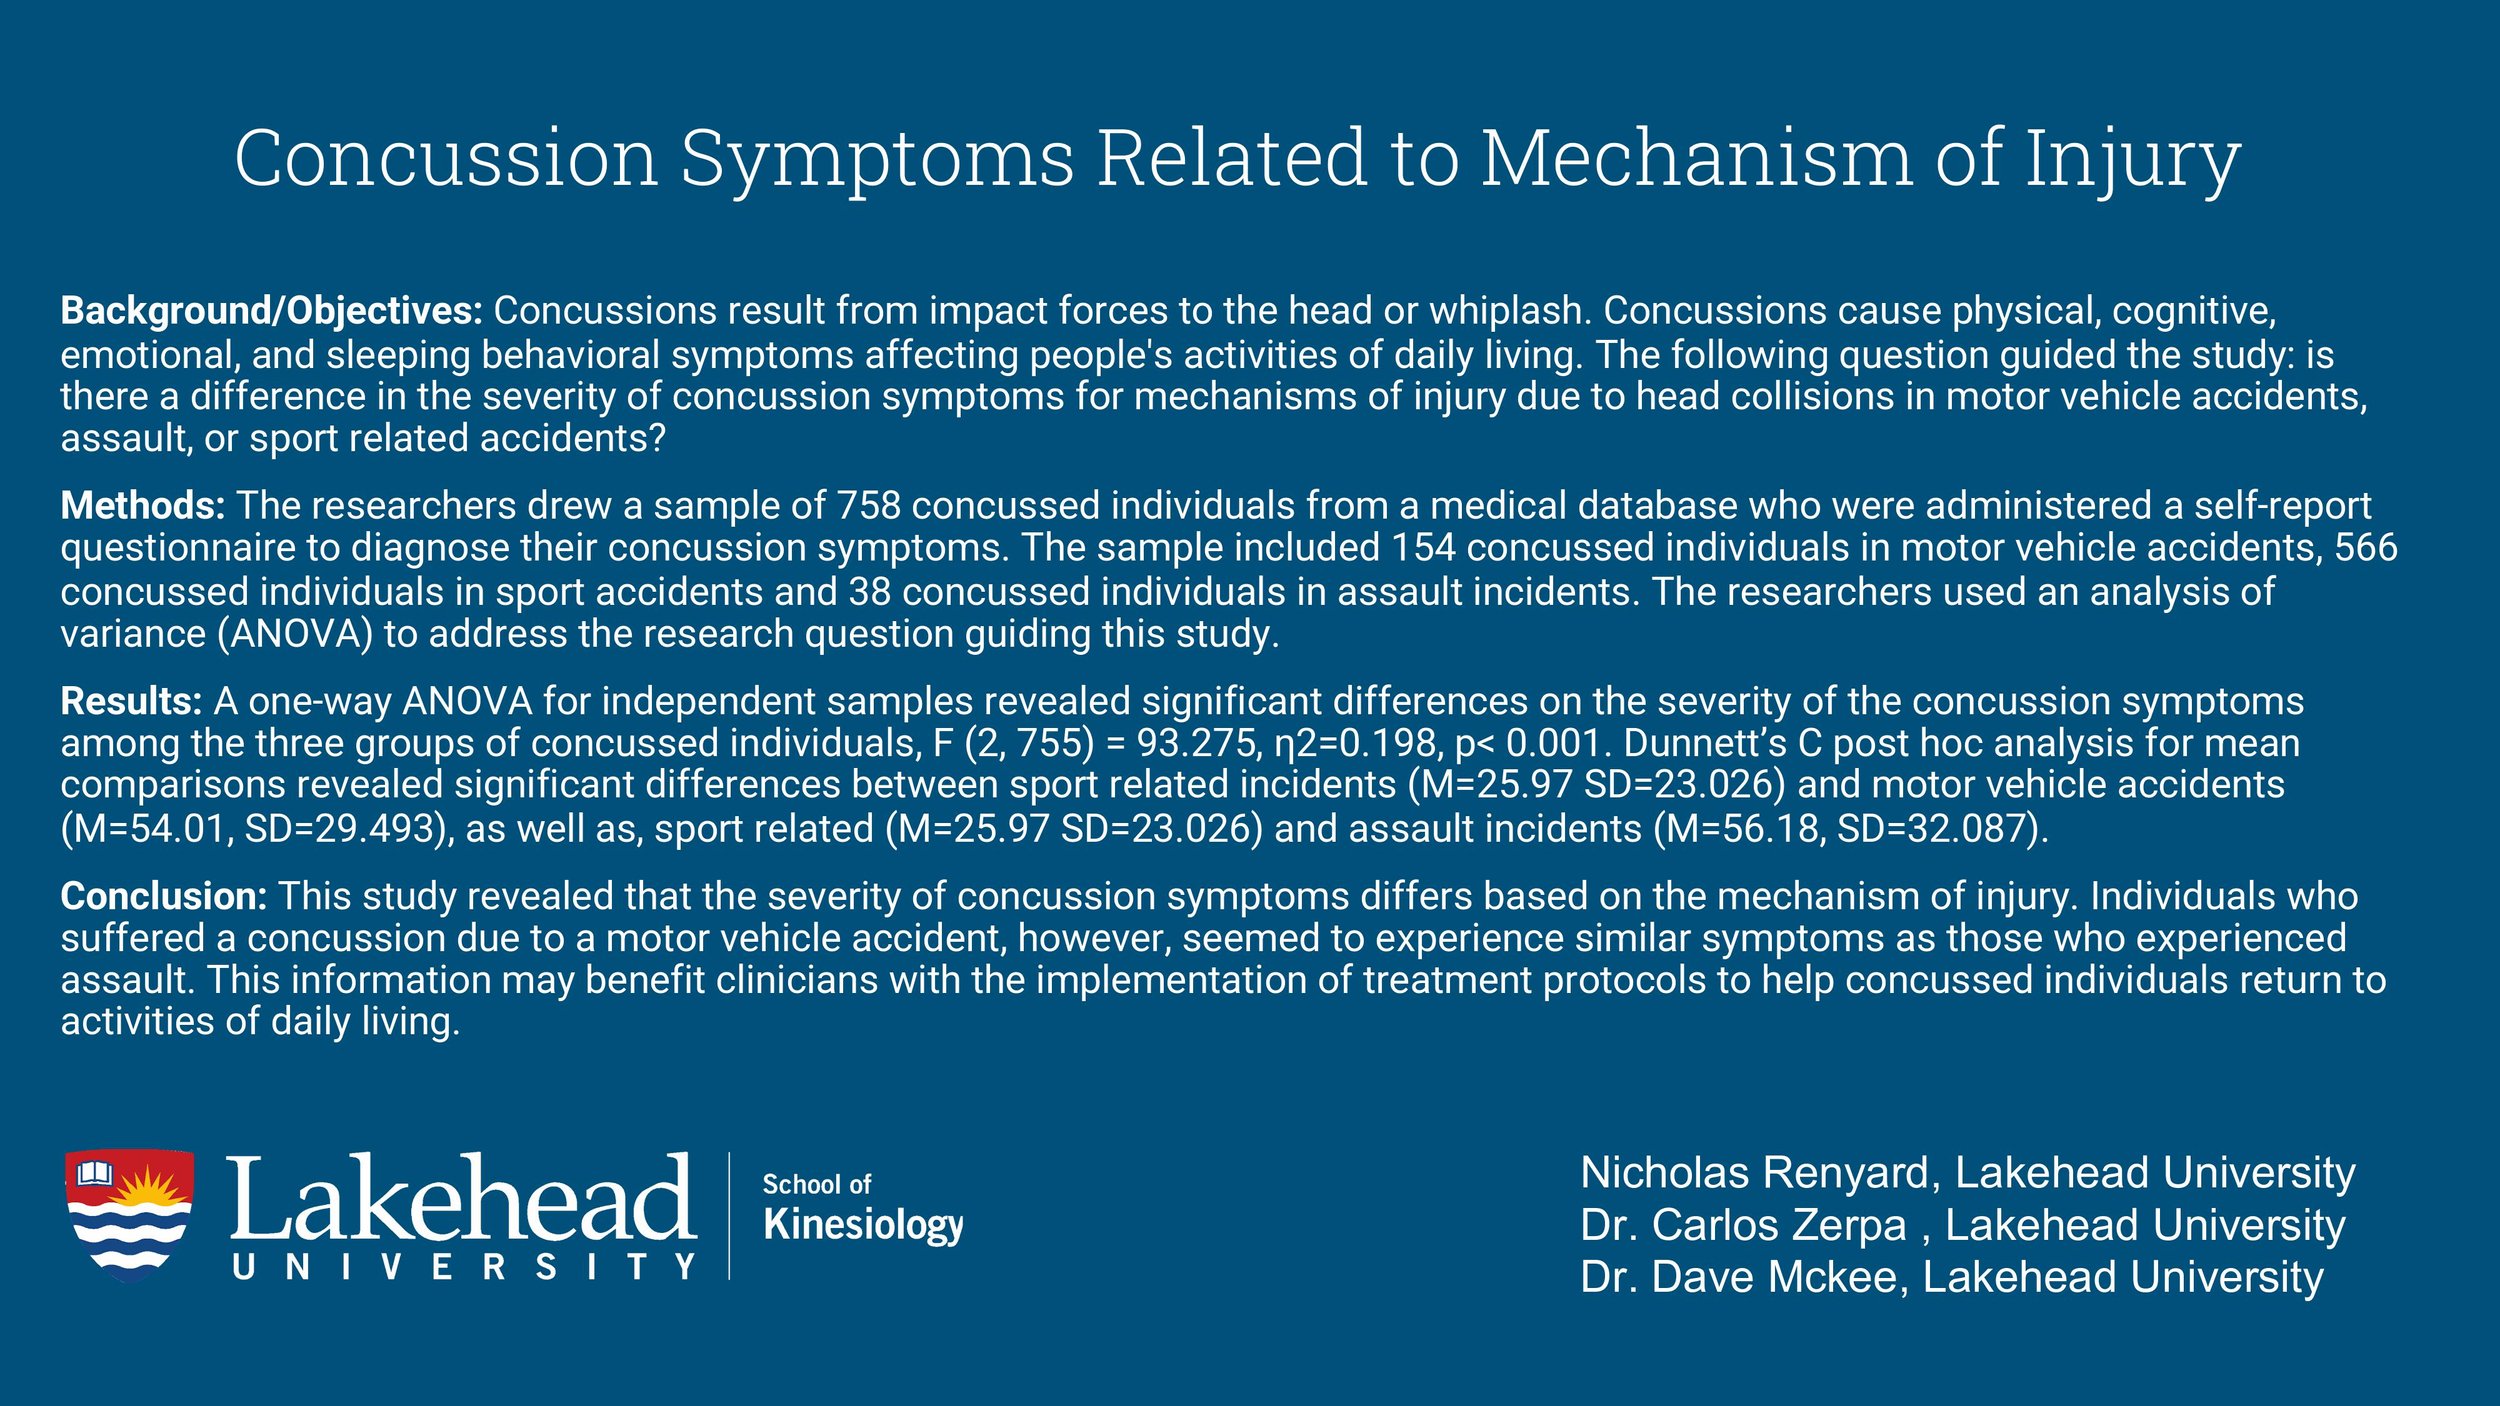 #4 Concussion symptoms related to mechanism of injury